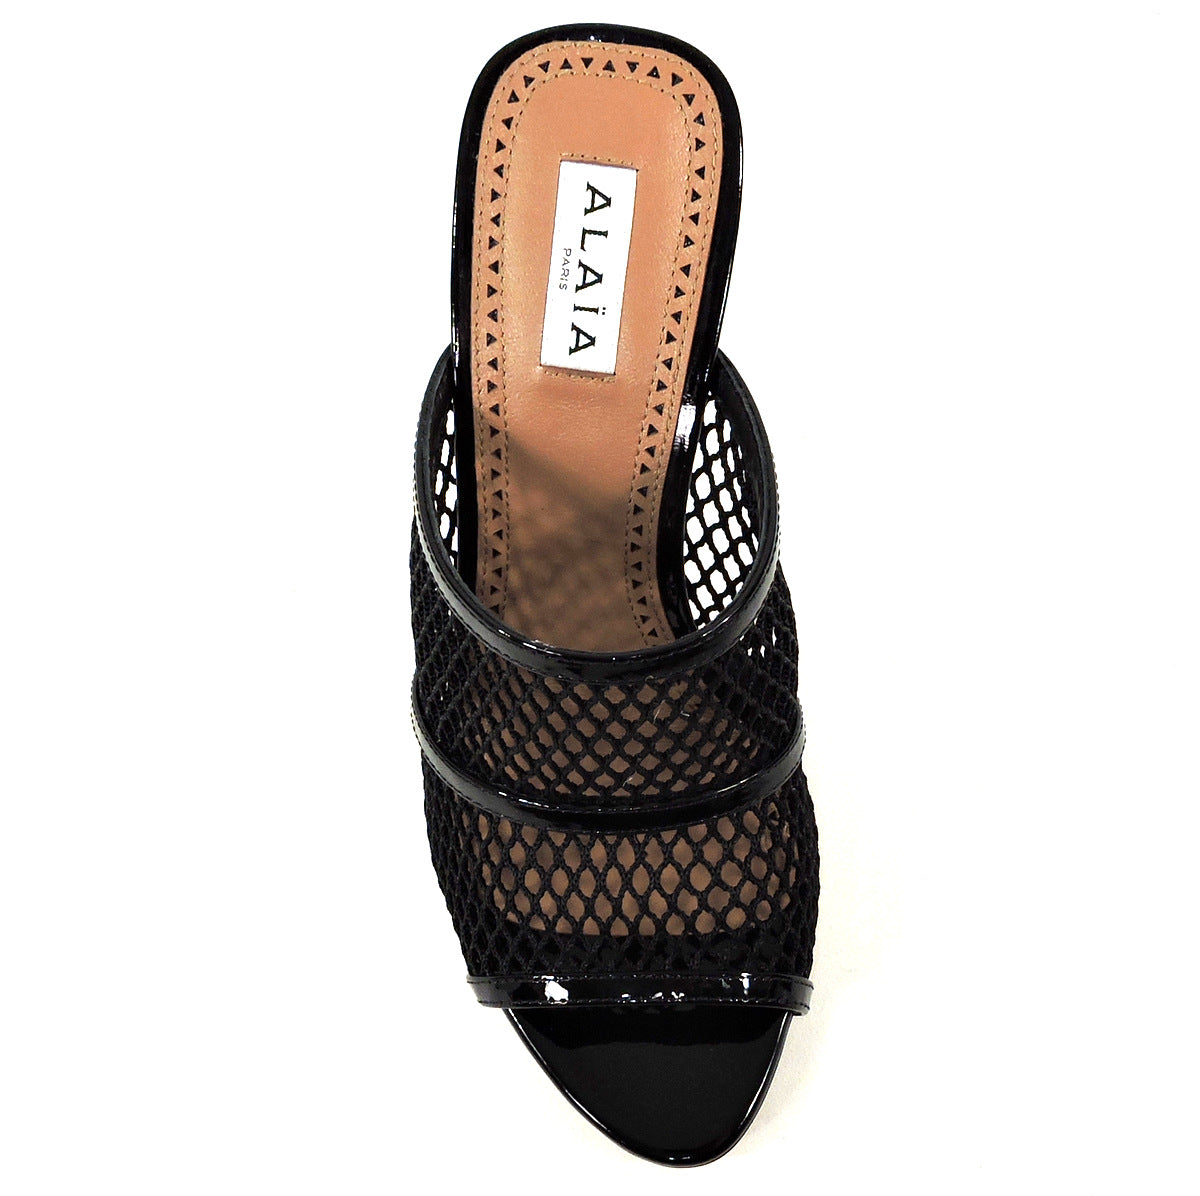 ALAIA 🇮🇹 WOMEN'S BLACK LEATHER AND FABRIC FASHION COMFORT MULES